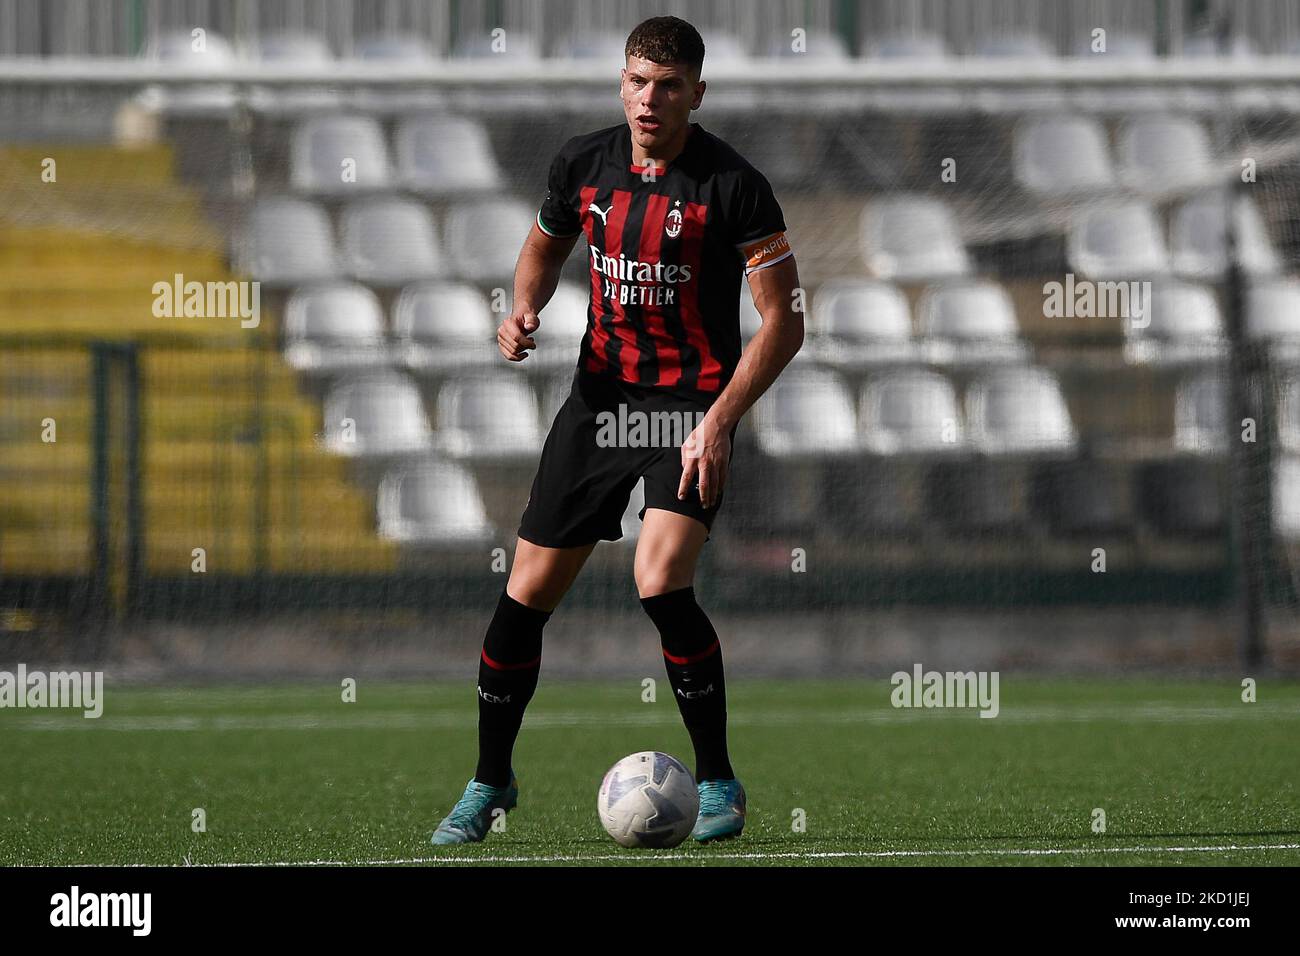 Vercelli, Italy. 30 October 2022. Andrei Coubis of AC Milan U19 in action during the Primavera 1 football match between Torino FC U19 and AC Milan U19. Credit: Nicolò Campo/Alamy Live News Stock Photo